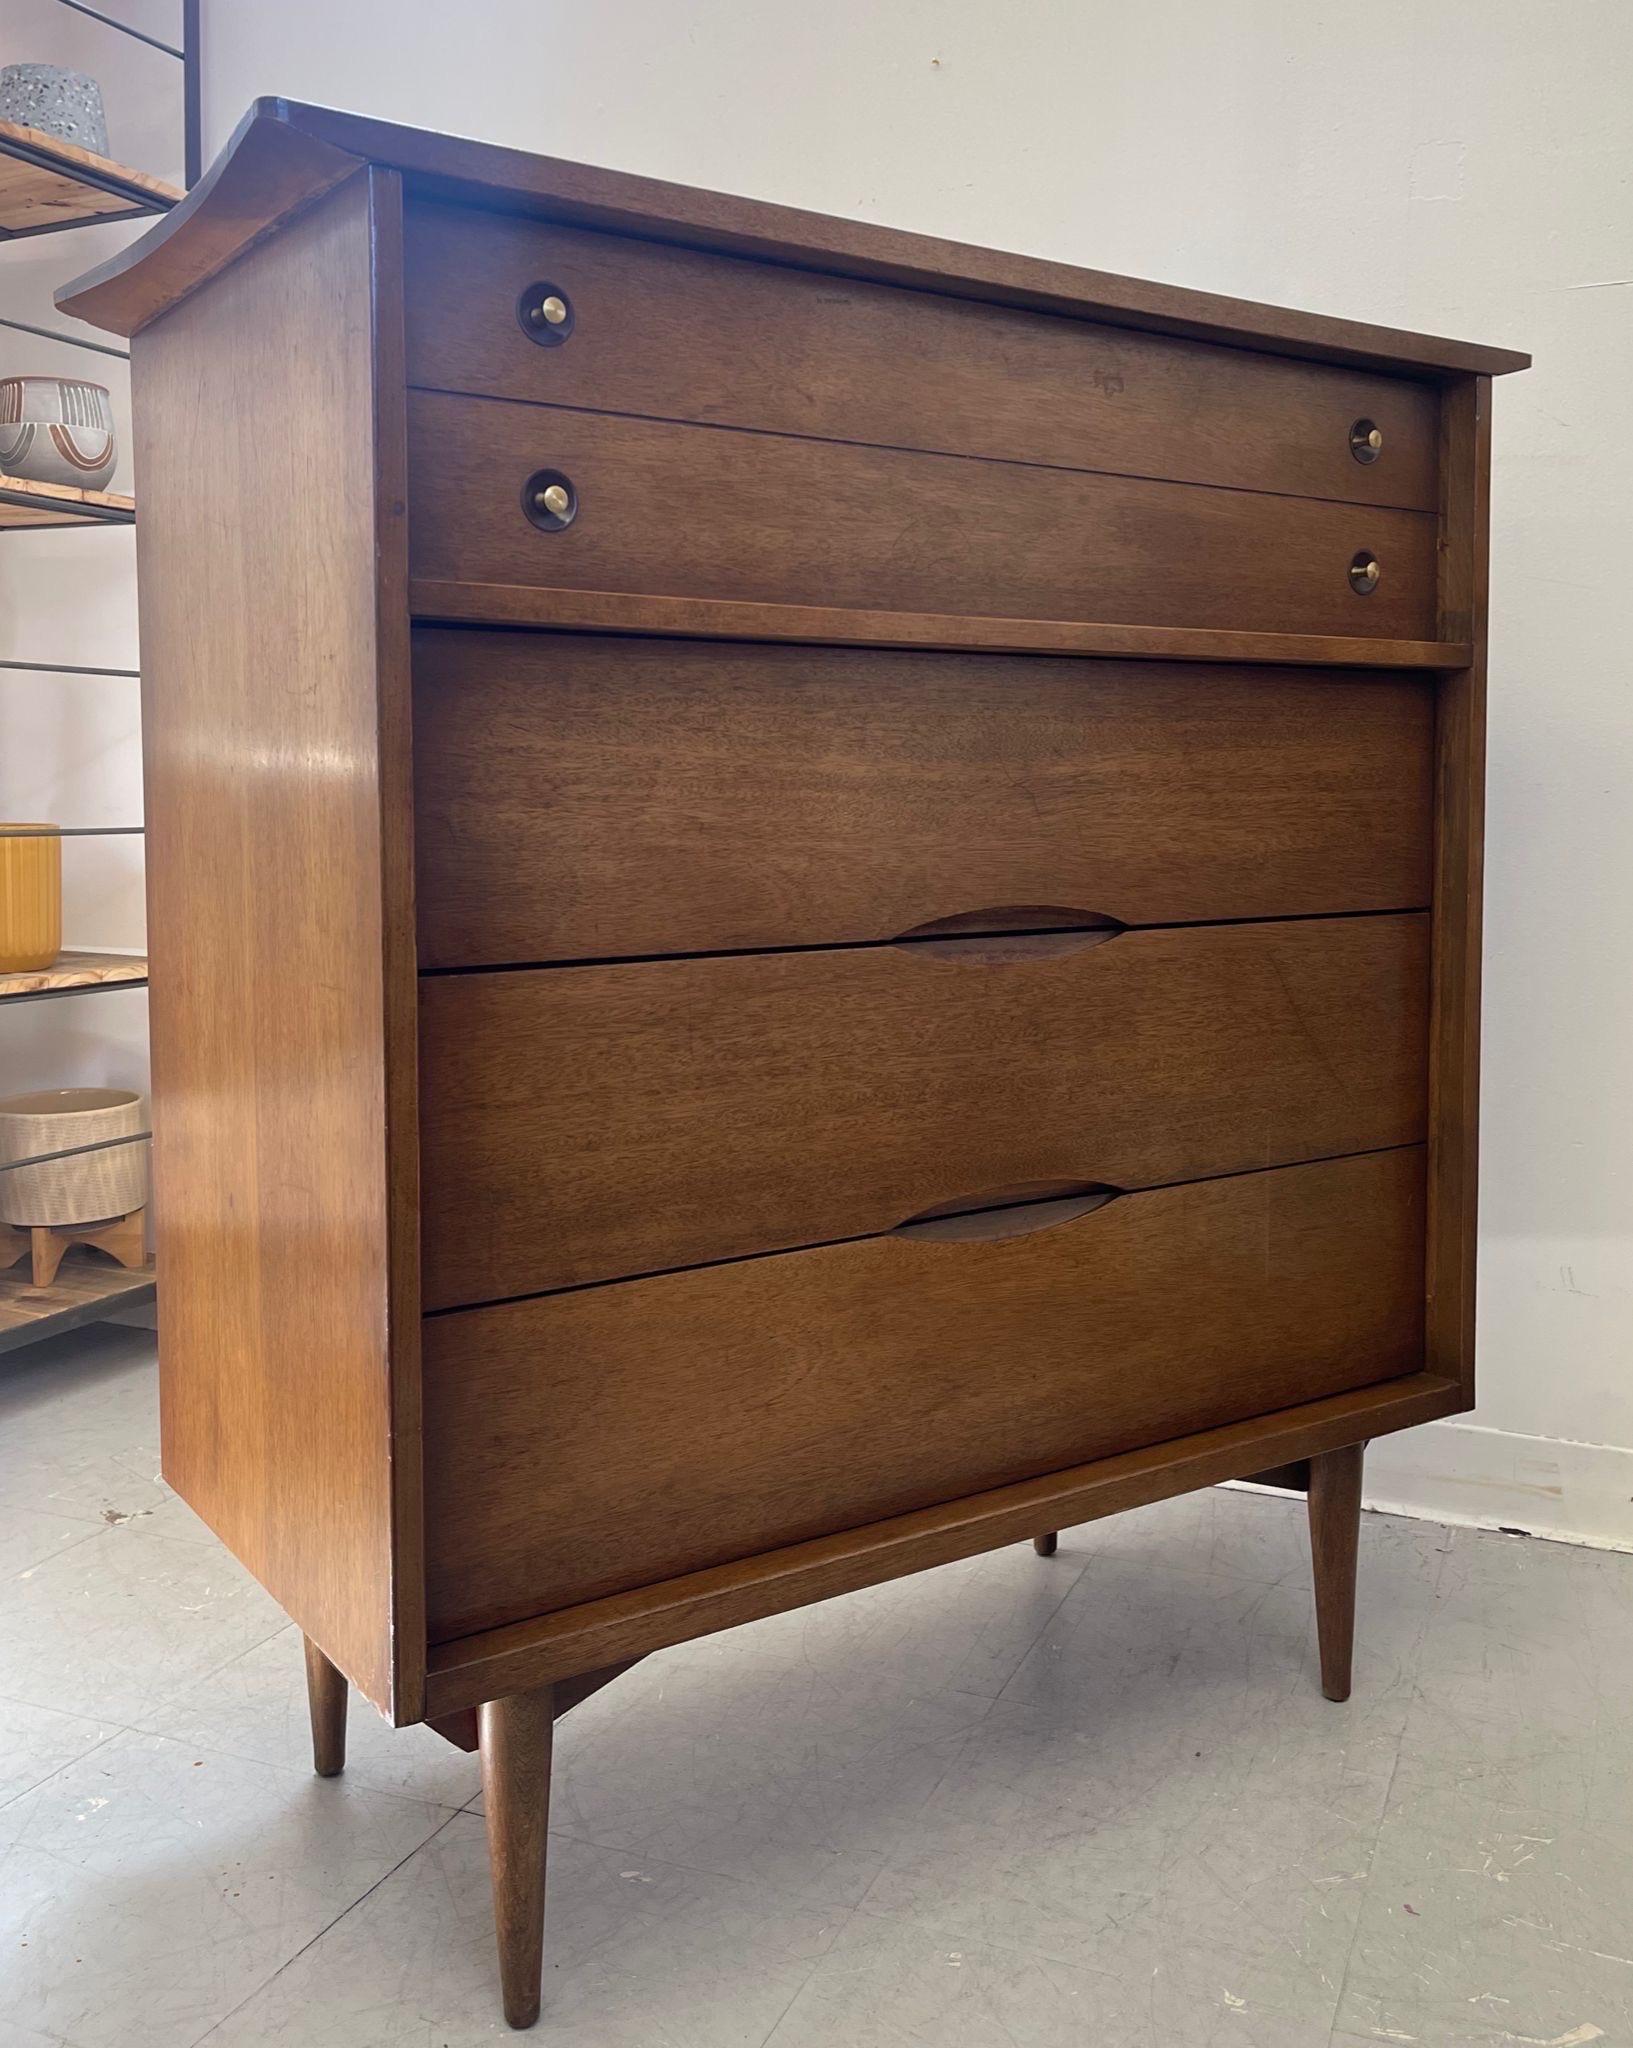 This Dresser features 4 Dovetailed Drawers. The top drawer has brass toned hardware. Similar in style to a Bassett furniture design. Tapered Legs. Curved top grains. Vintage Condition Consistent with Age as Pictured.

Dimensions. 40 W ; 18 D ; 42 H